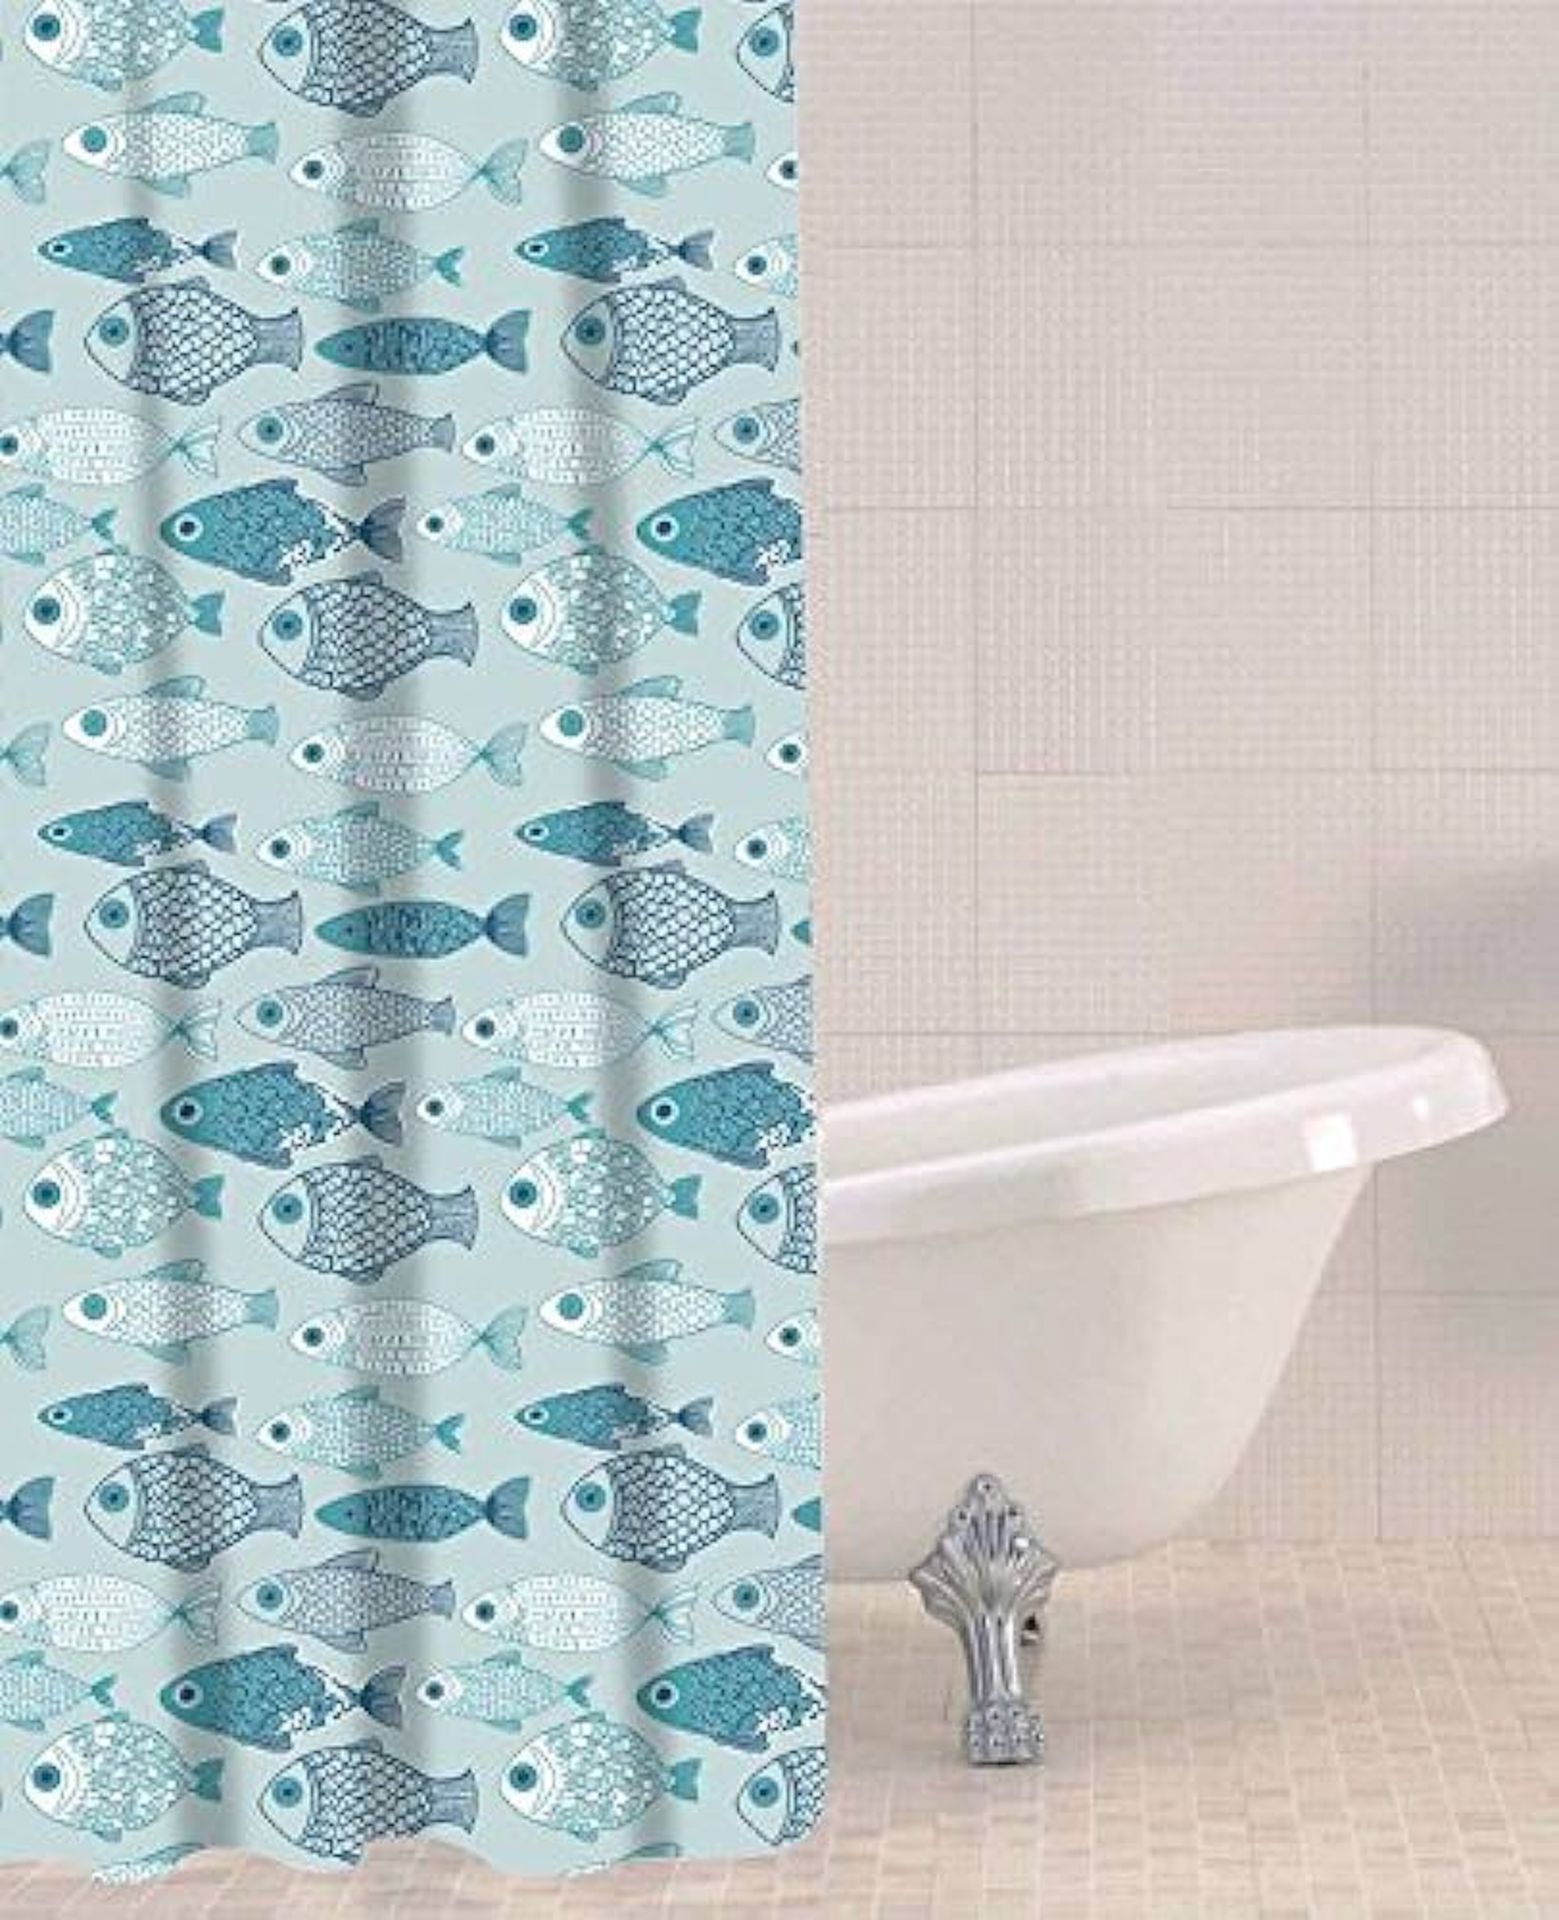 Morocann Shower Curtain Set (Delivery Band A)